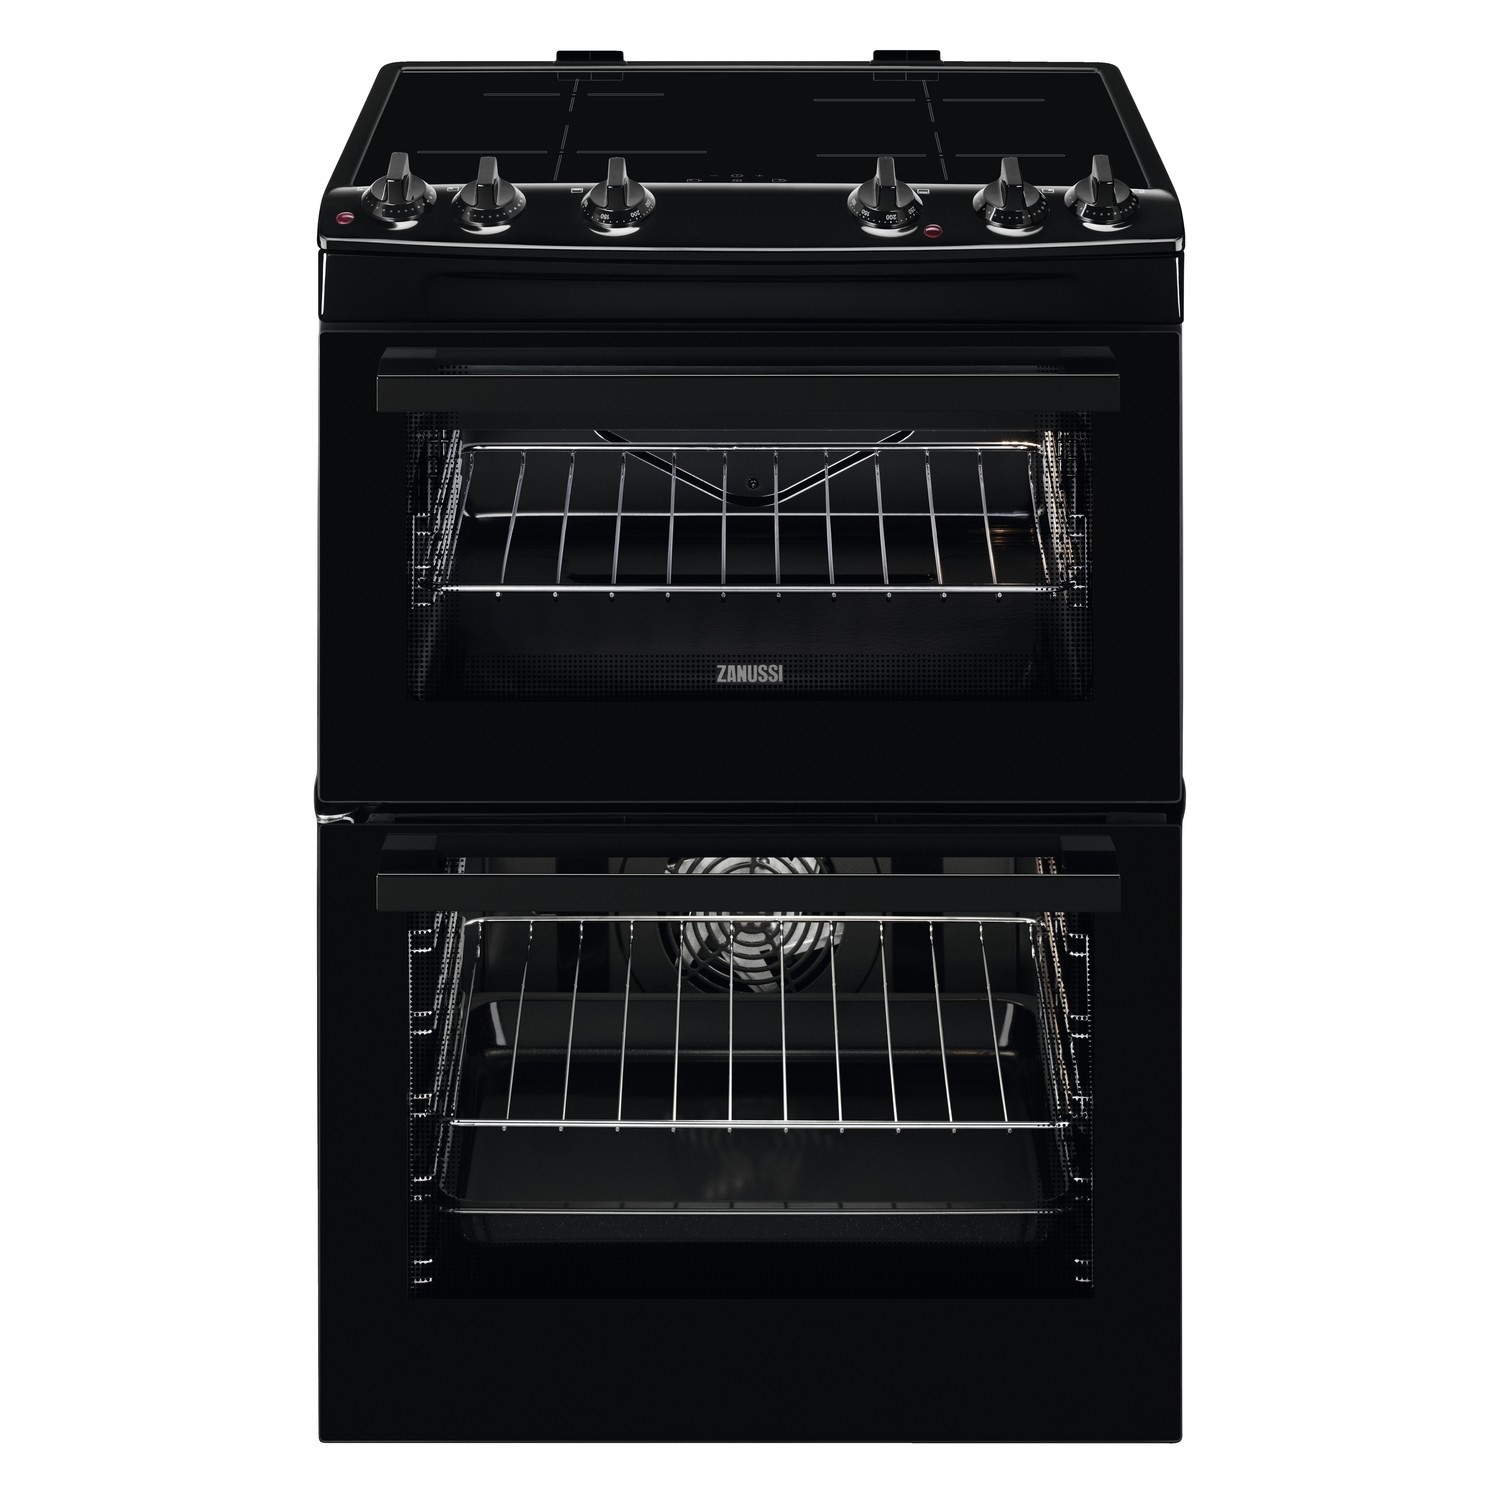 Zanussi 60cm Double Oven Induction Electric Cooker - Black